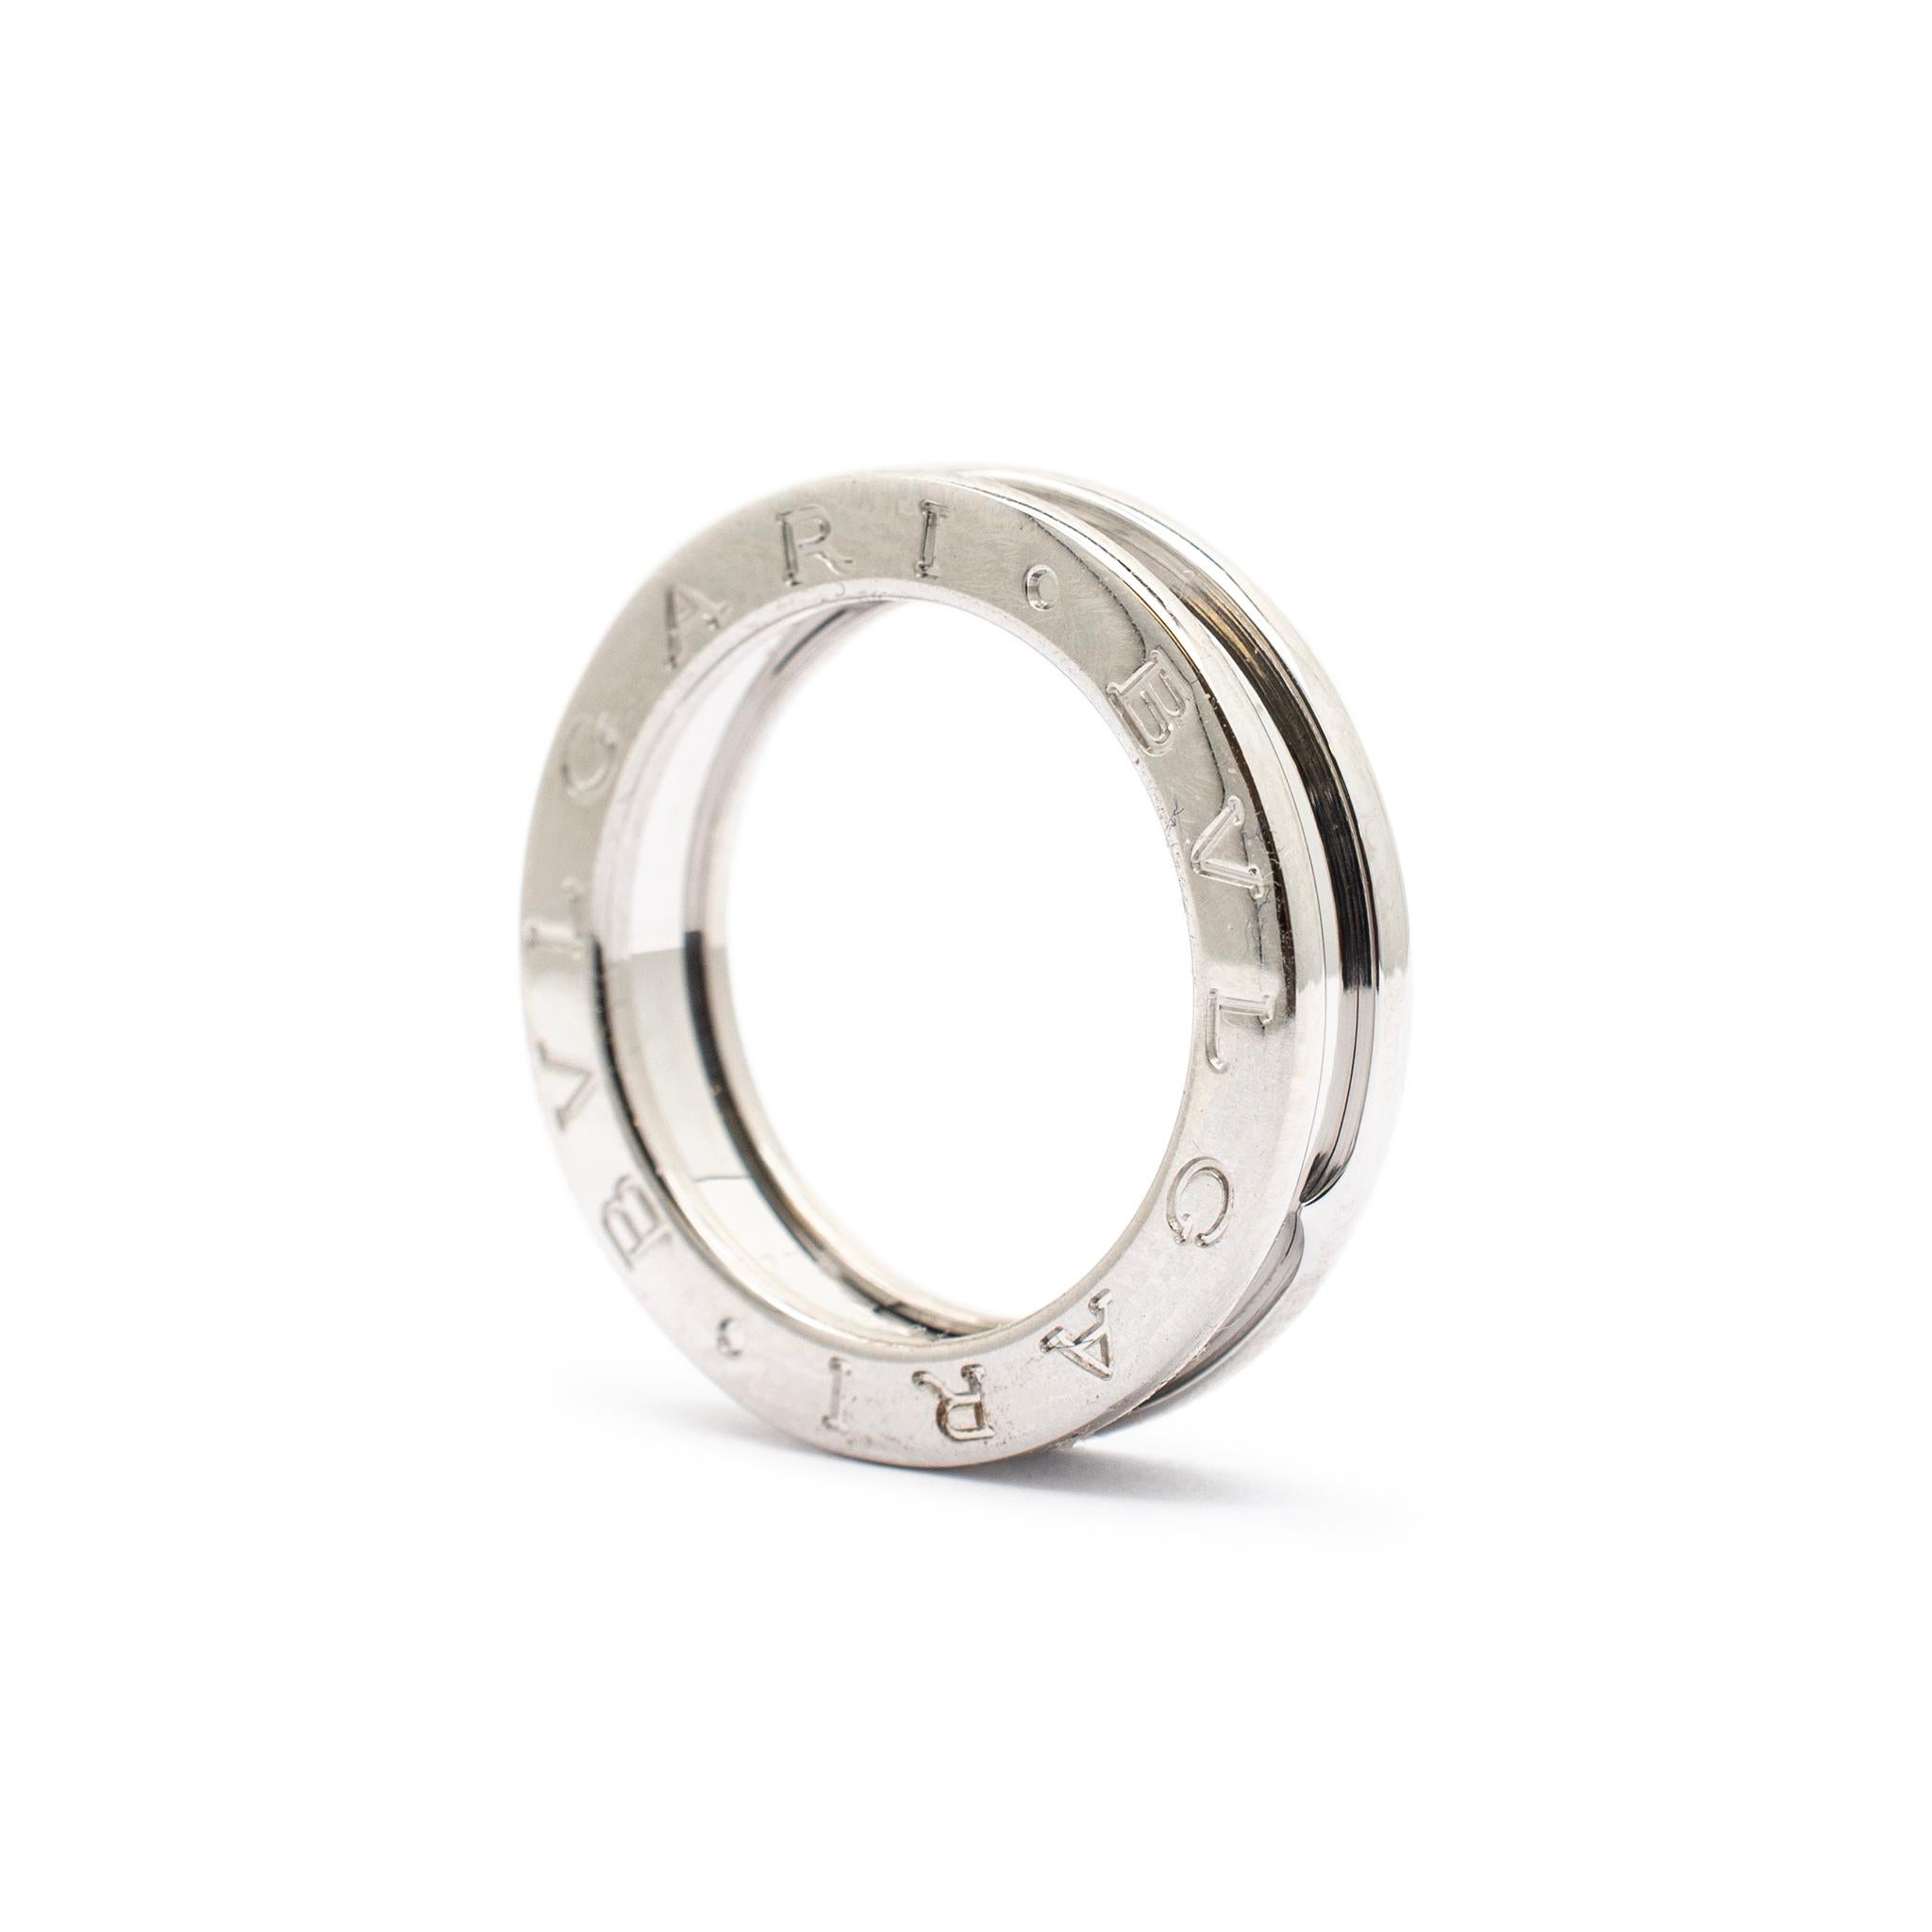 Brand: Bvlgari

Metal Type: 18K White Gold

Size: 6

European Size: 52

Shank Maximum Width: 5.00 mm

Weight: 7.10 grams

18K white gold wedding band with a soft-square shank. The 